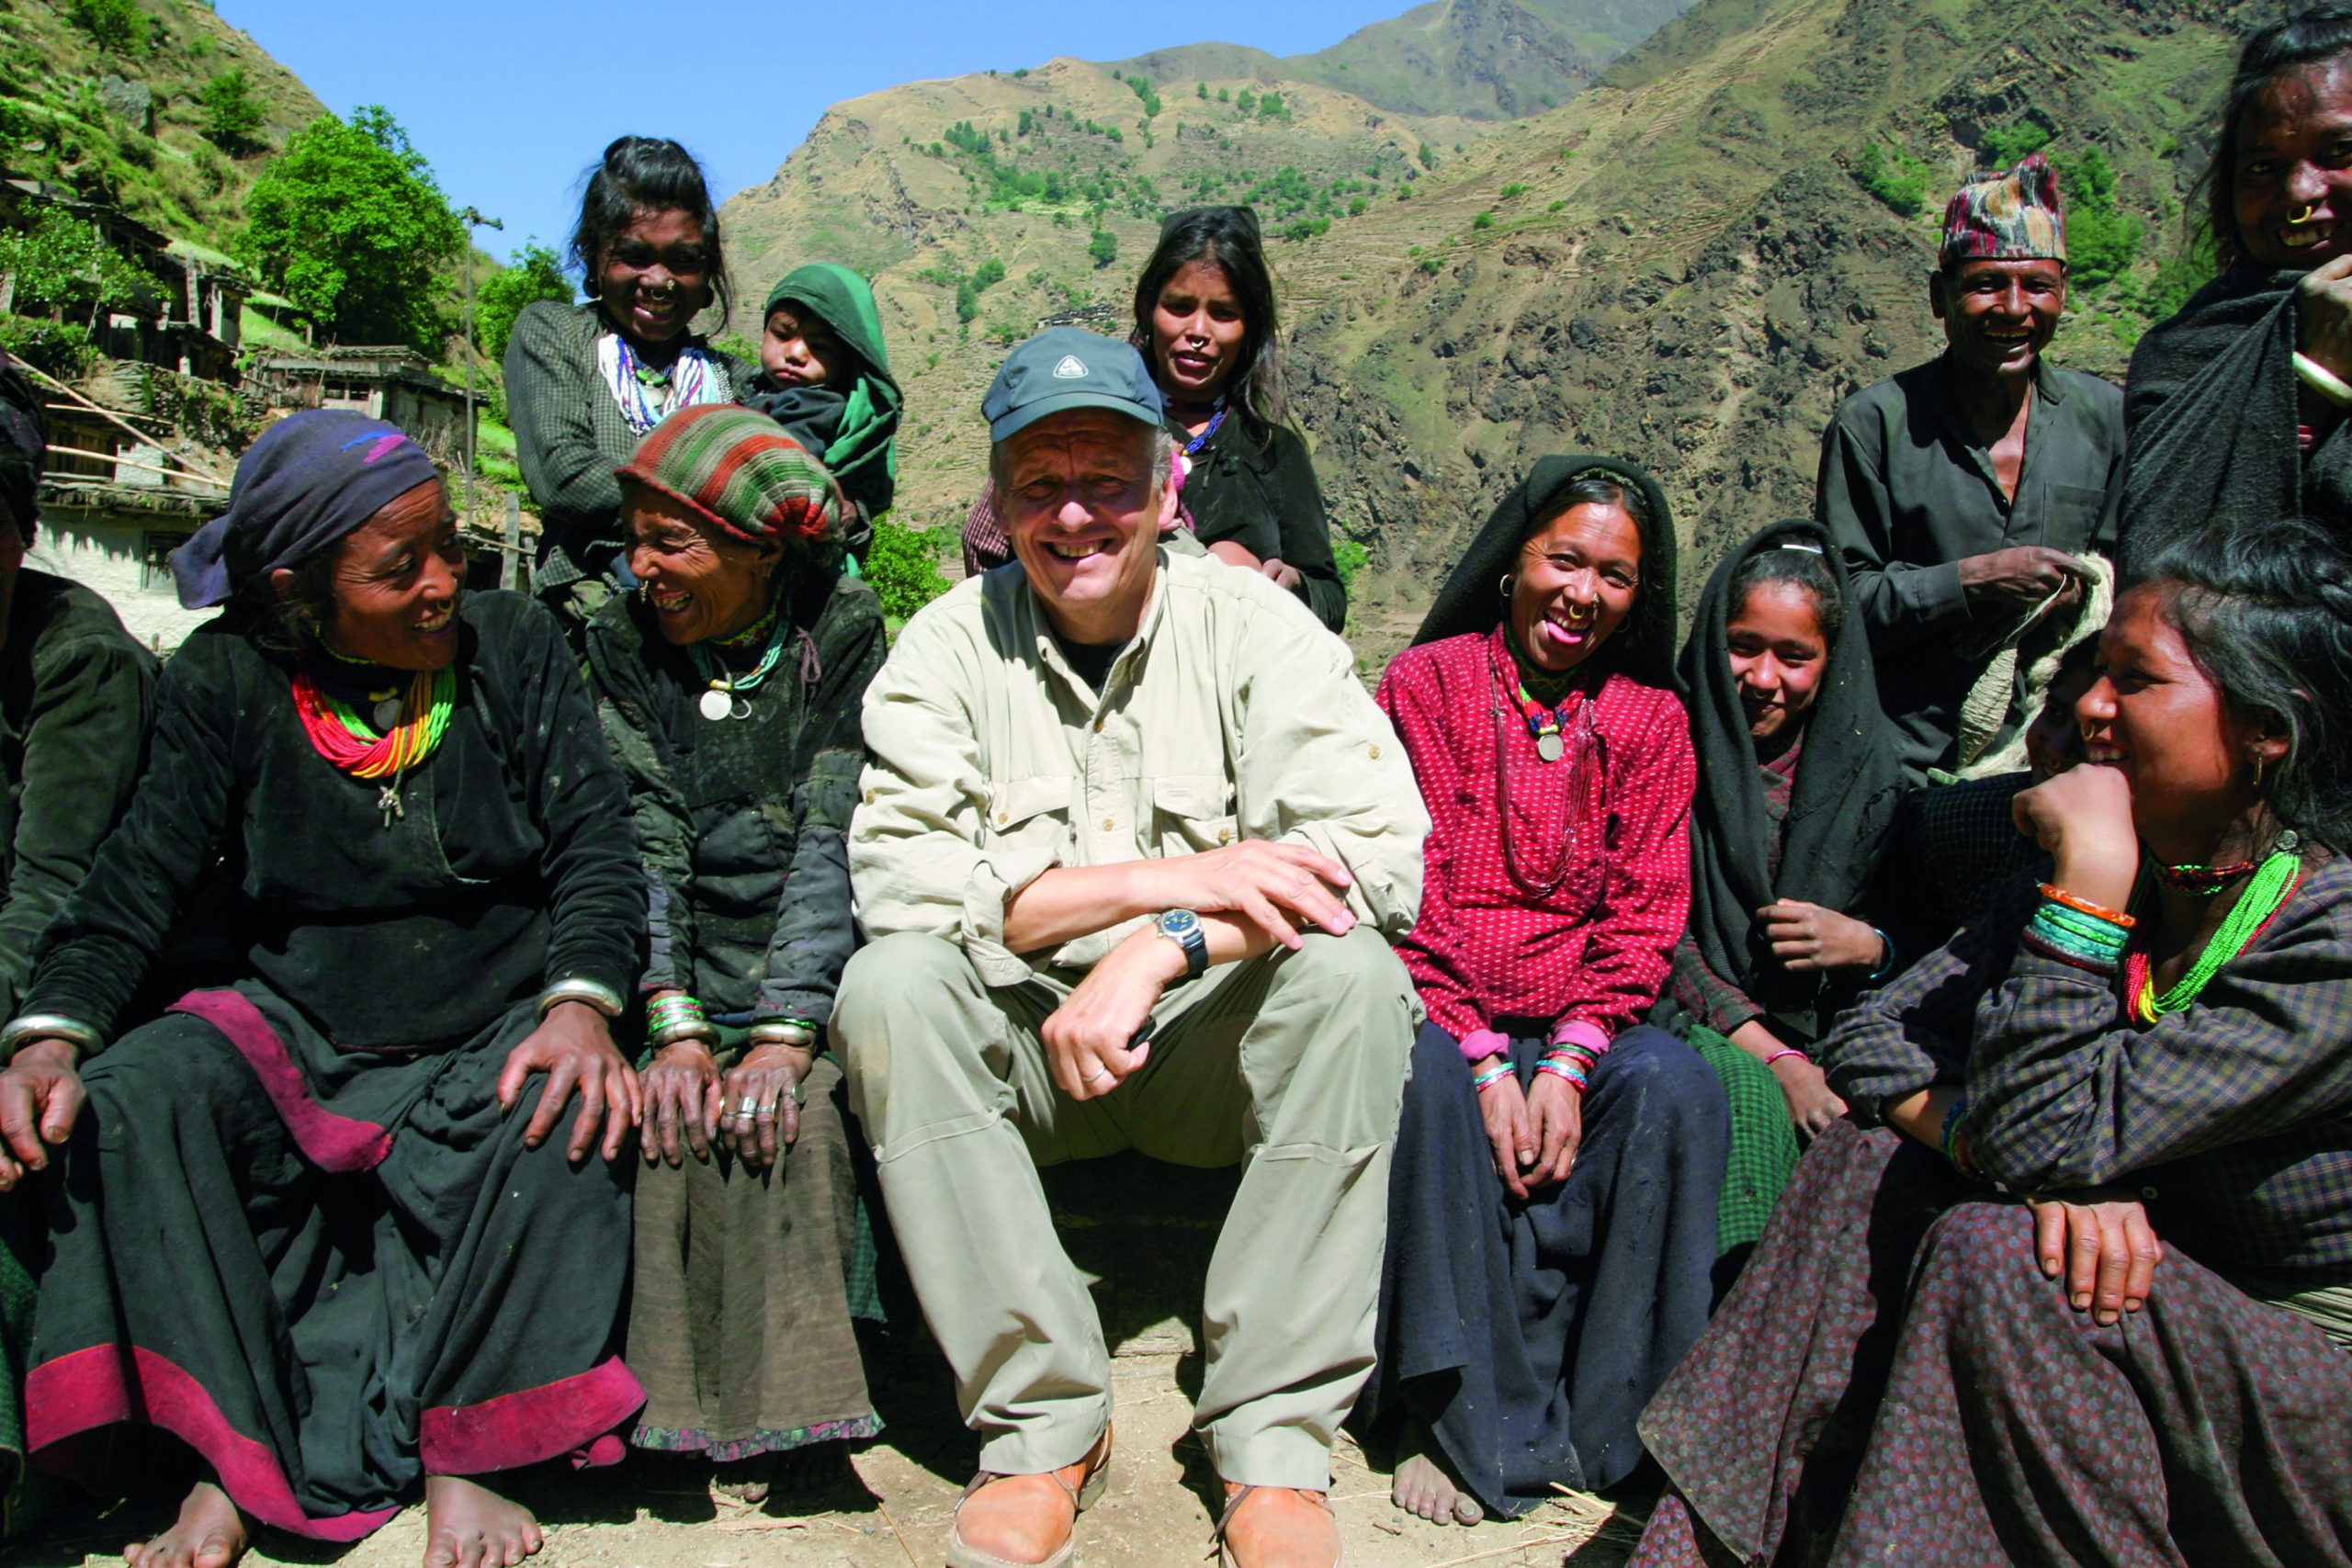 Rauli Virtanen is in a group photo with Nepalese people. They are smiling for the camera.